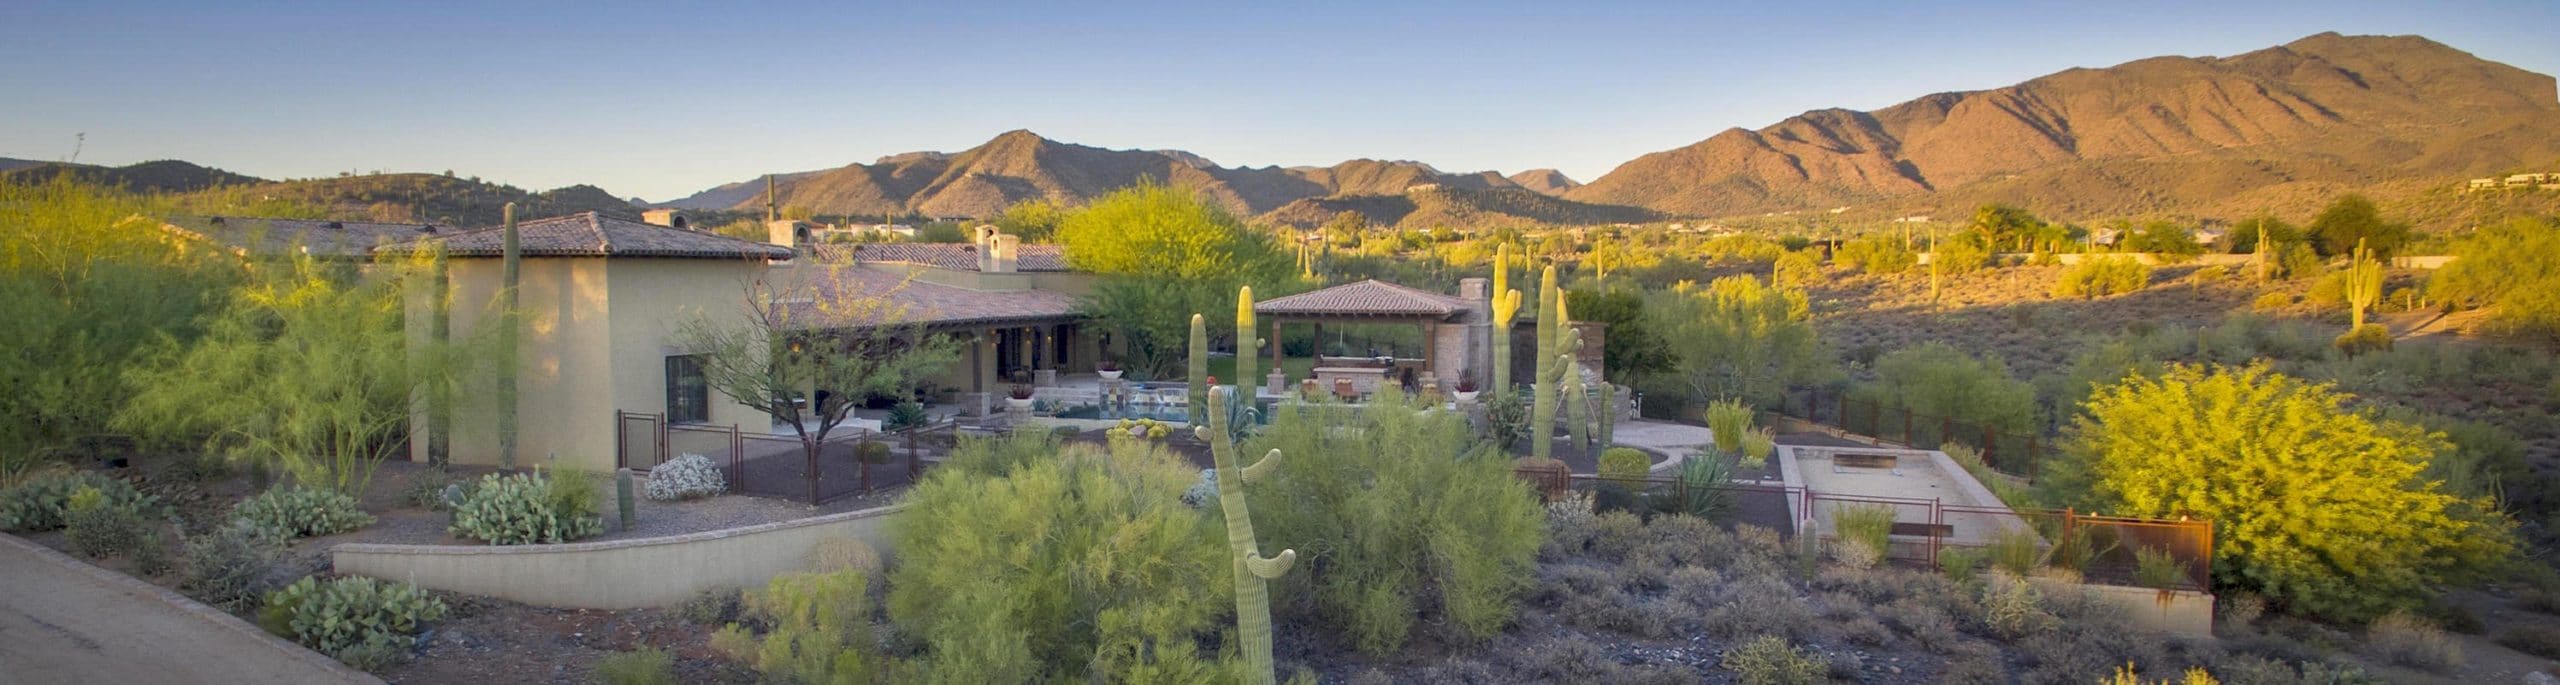 willow-springs-luxury-homes-for-sale-cave-creek-00